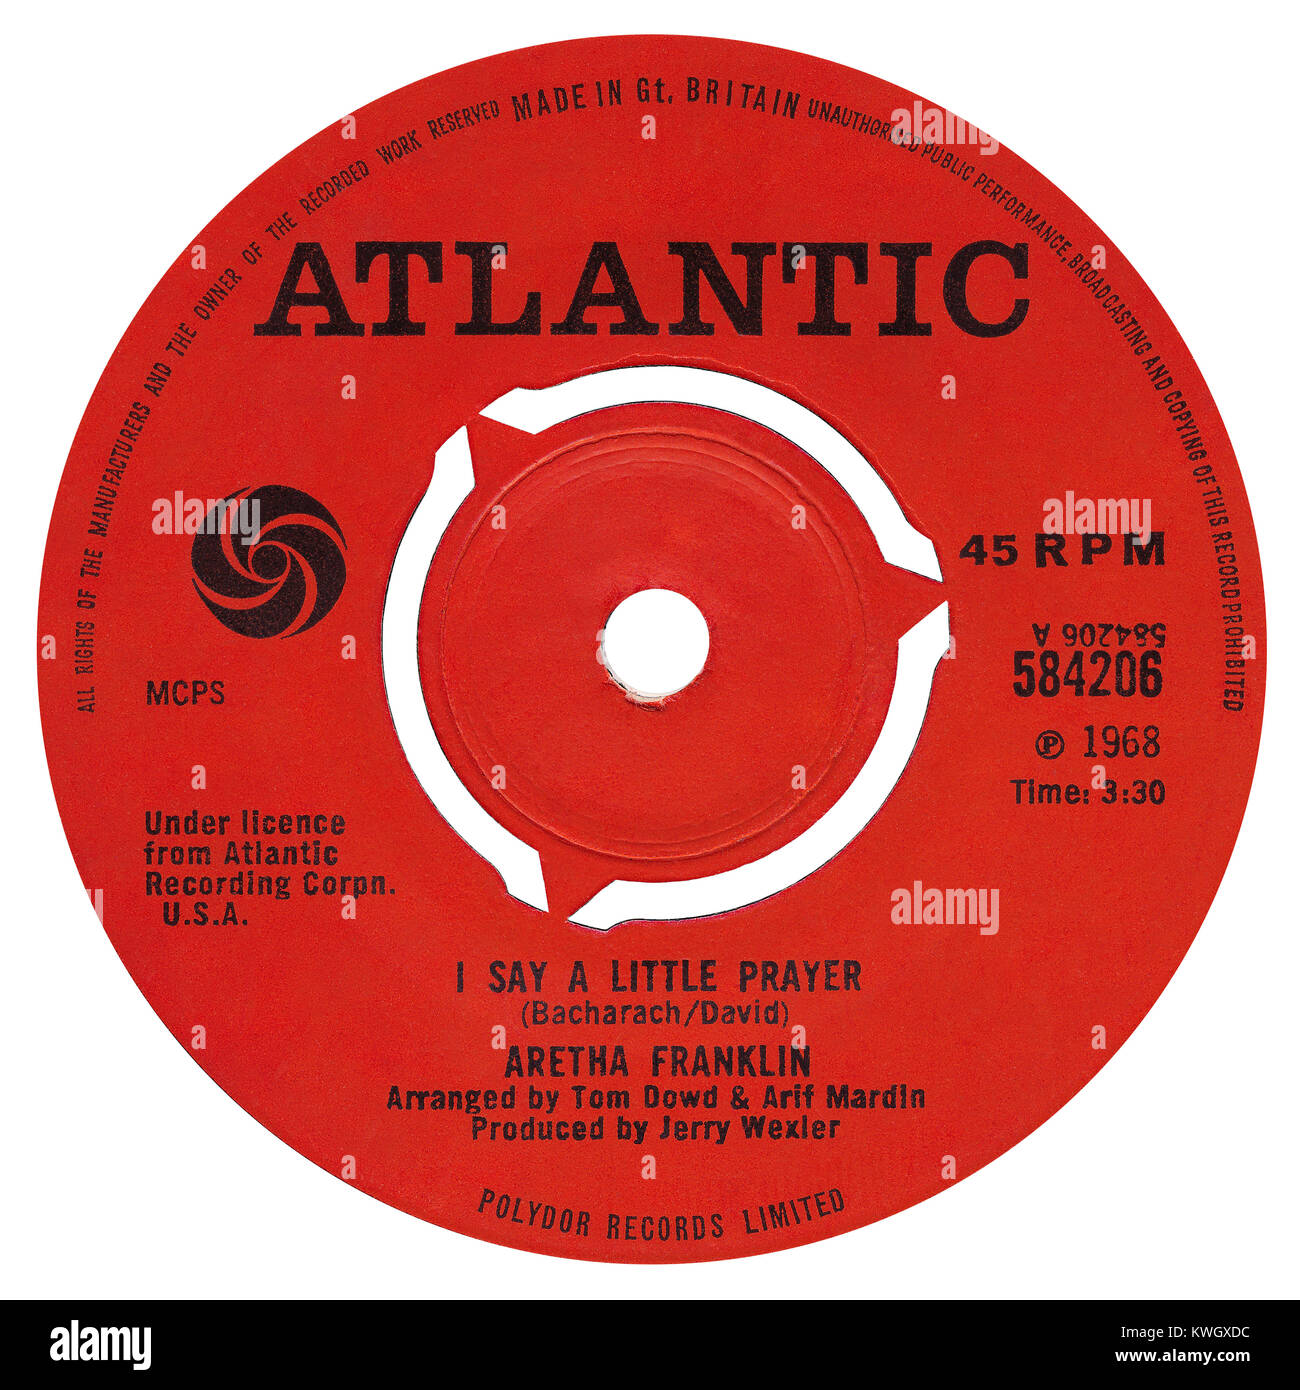 45 RPM 7' UK record label of I Say A Little Prayer by Aretha Franklin. Written by Burt Bacharach and Hal David, arranged by Tom Dowd and Arif Mardin and produced by Jerry Wexler. Released on the Atlantic label in August 1968. Stock Photo